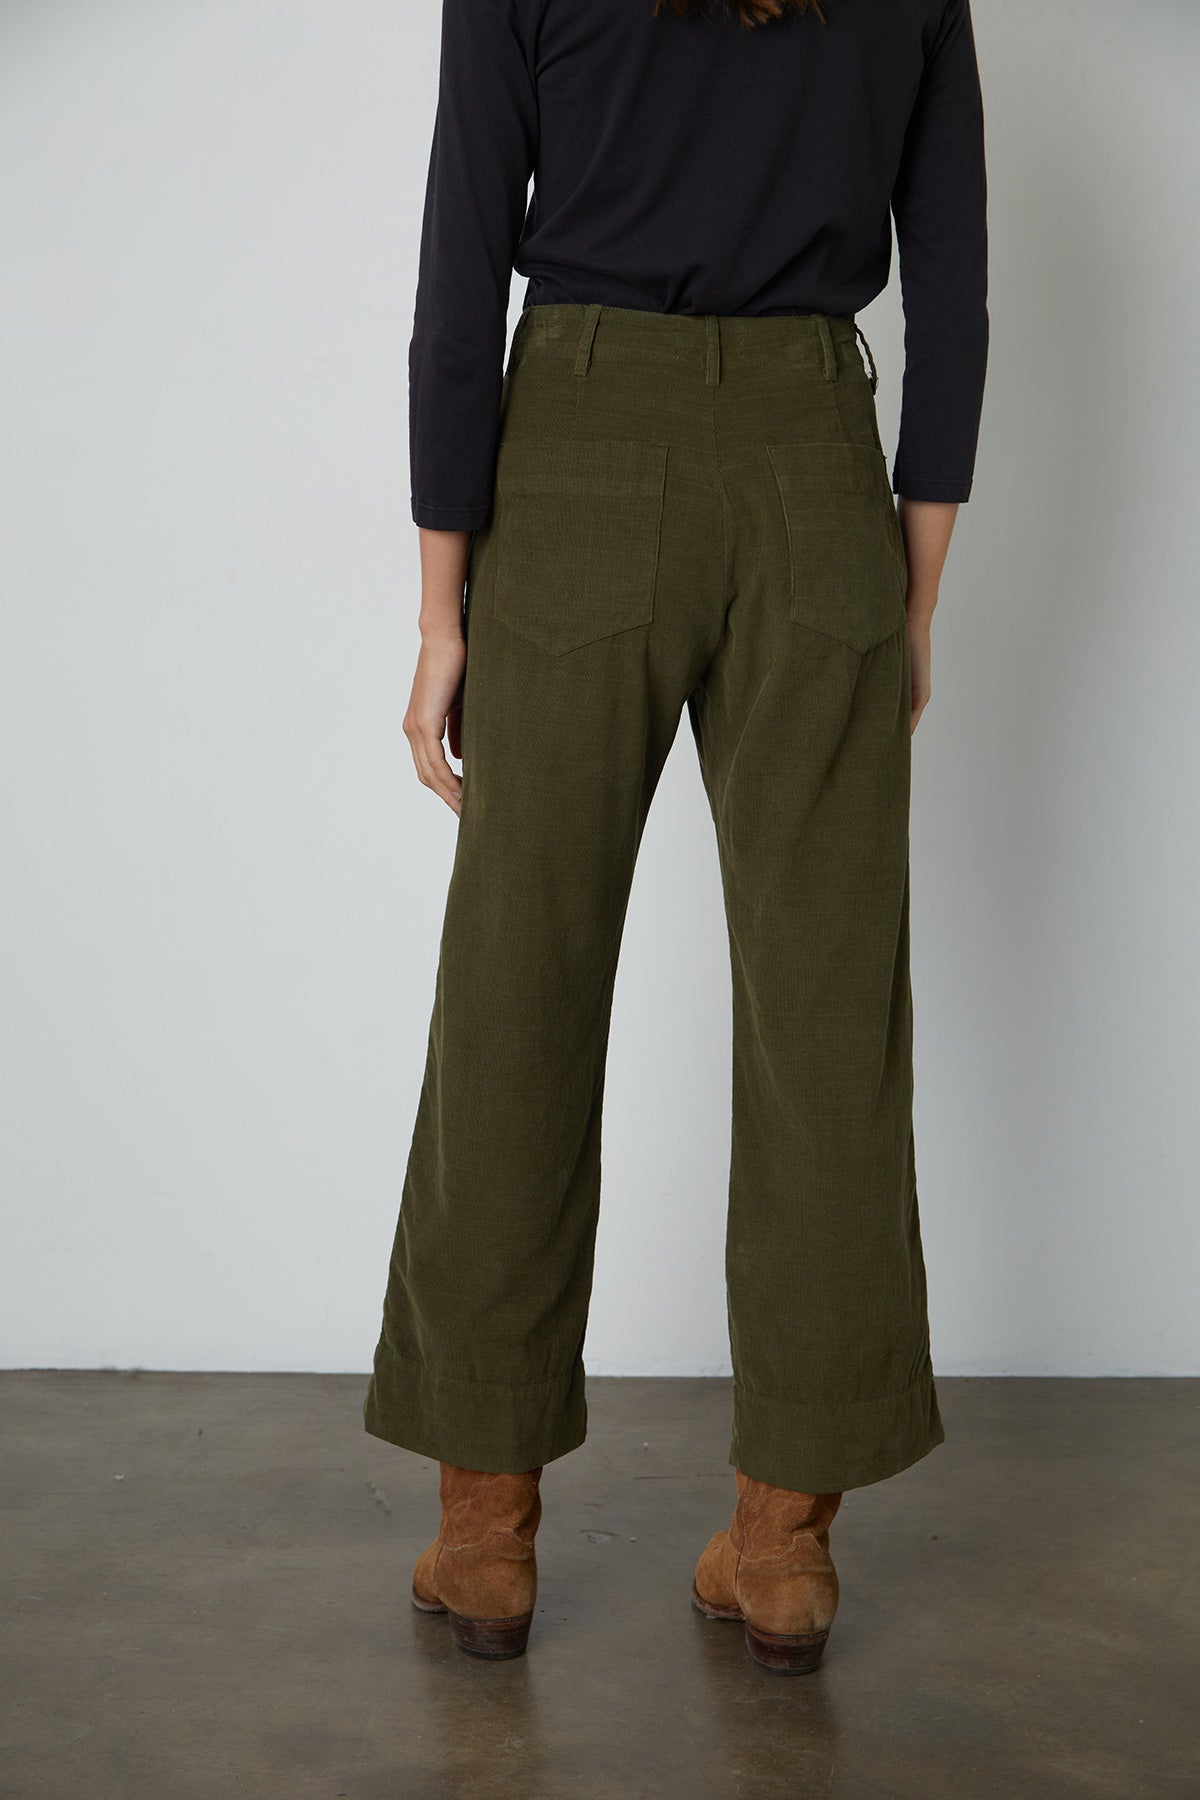 Vera Corduroy Wide Leg Pant in Aloe back standing with boots-26654355194049